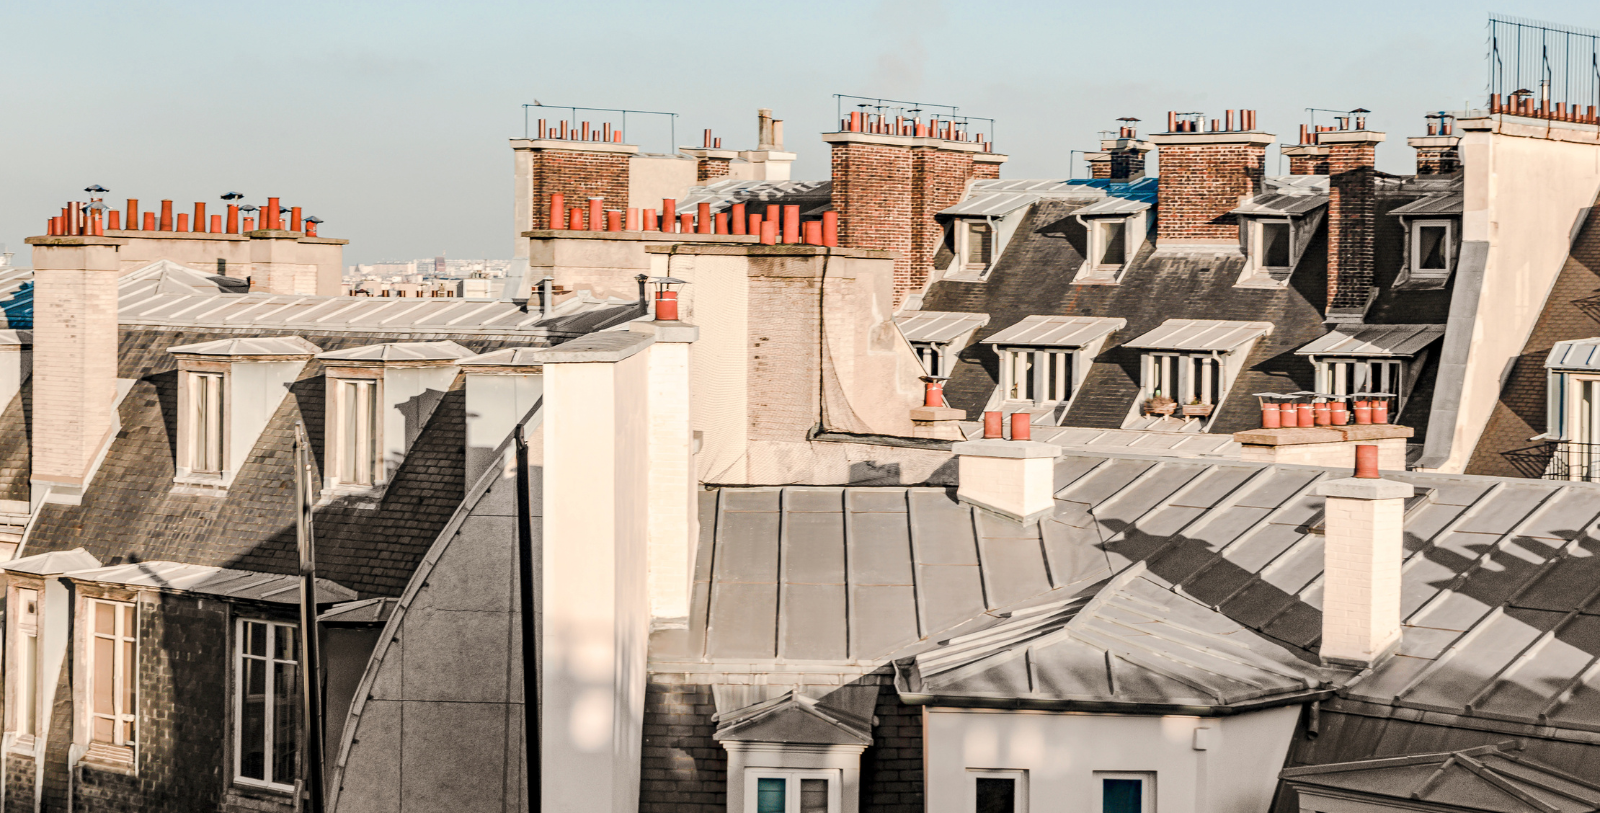 Image of Parisian rooftops from Le Royal Monceau-Raffles Paris, 1928, Member of Historic Hotels Worldwide, in Paris, France